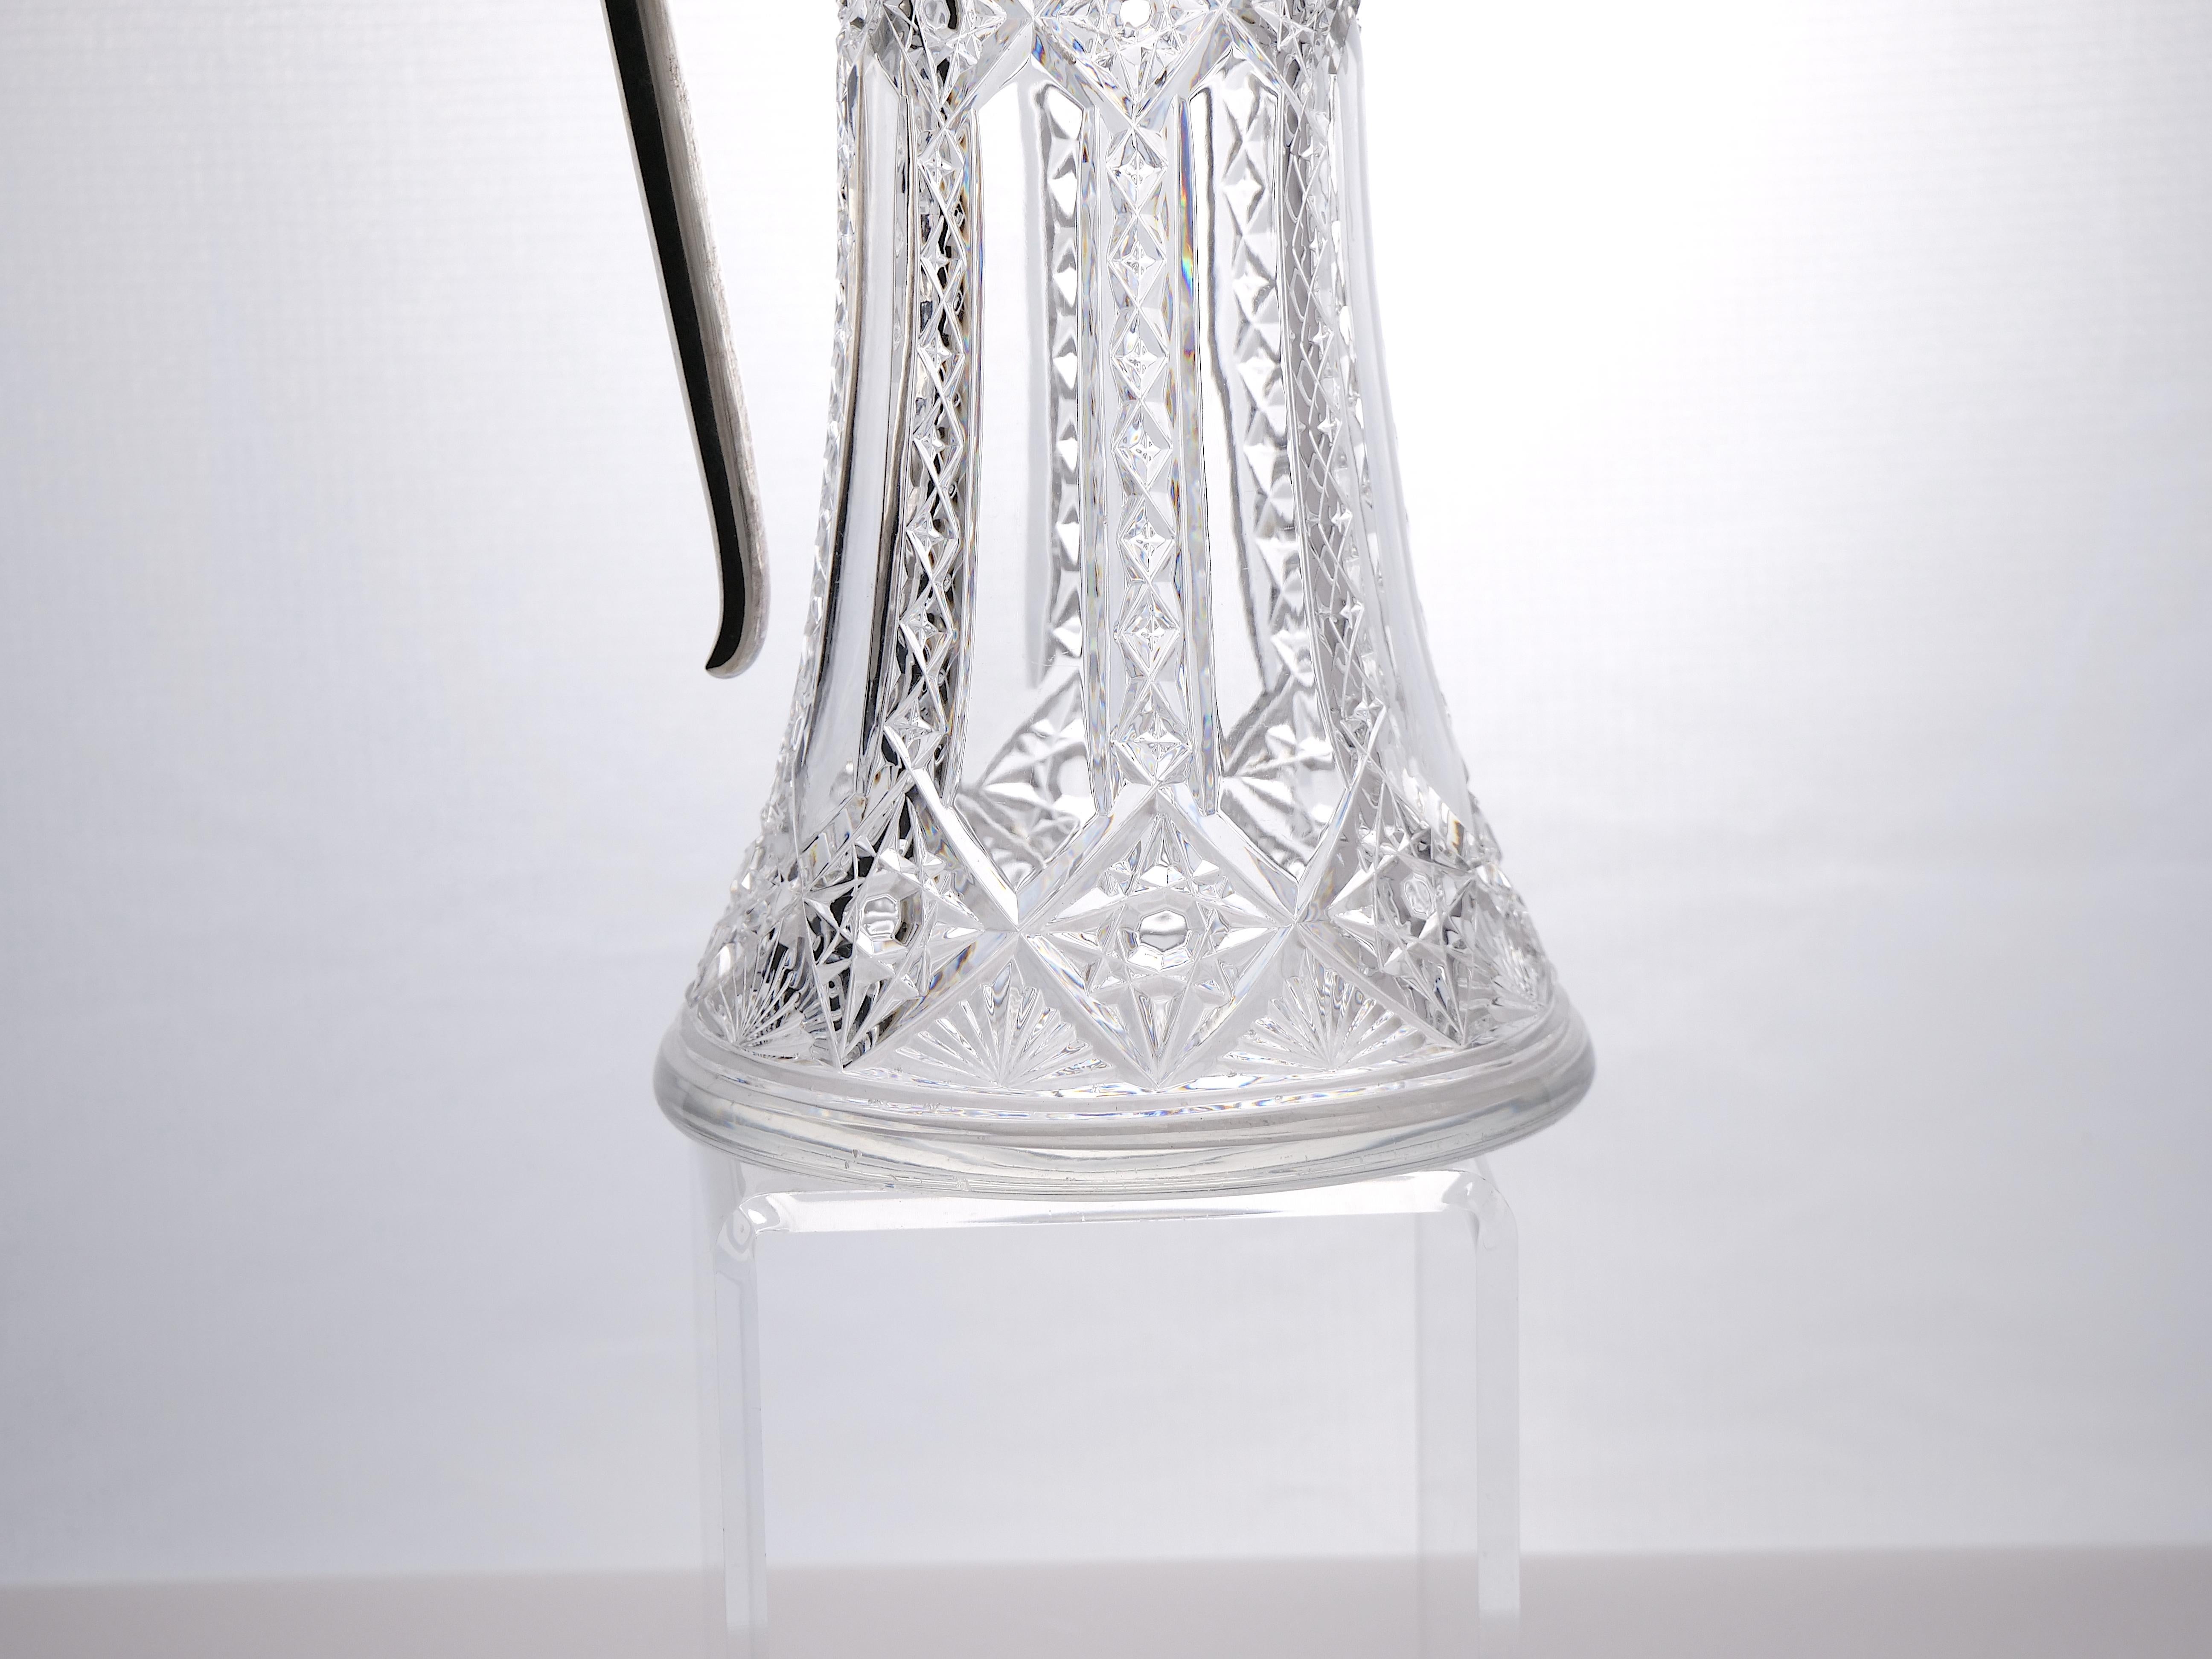 19th Century Sterling Silver / Cut Glass Claret Jug / Pitcher For Sale 7